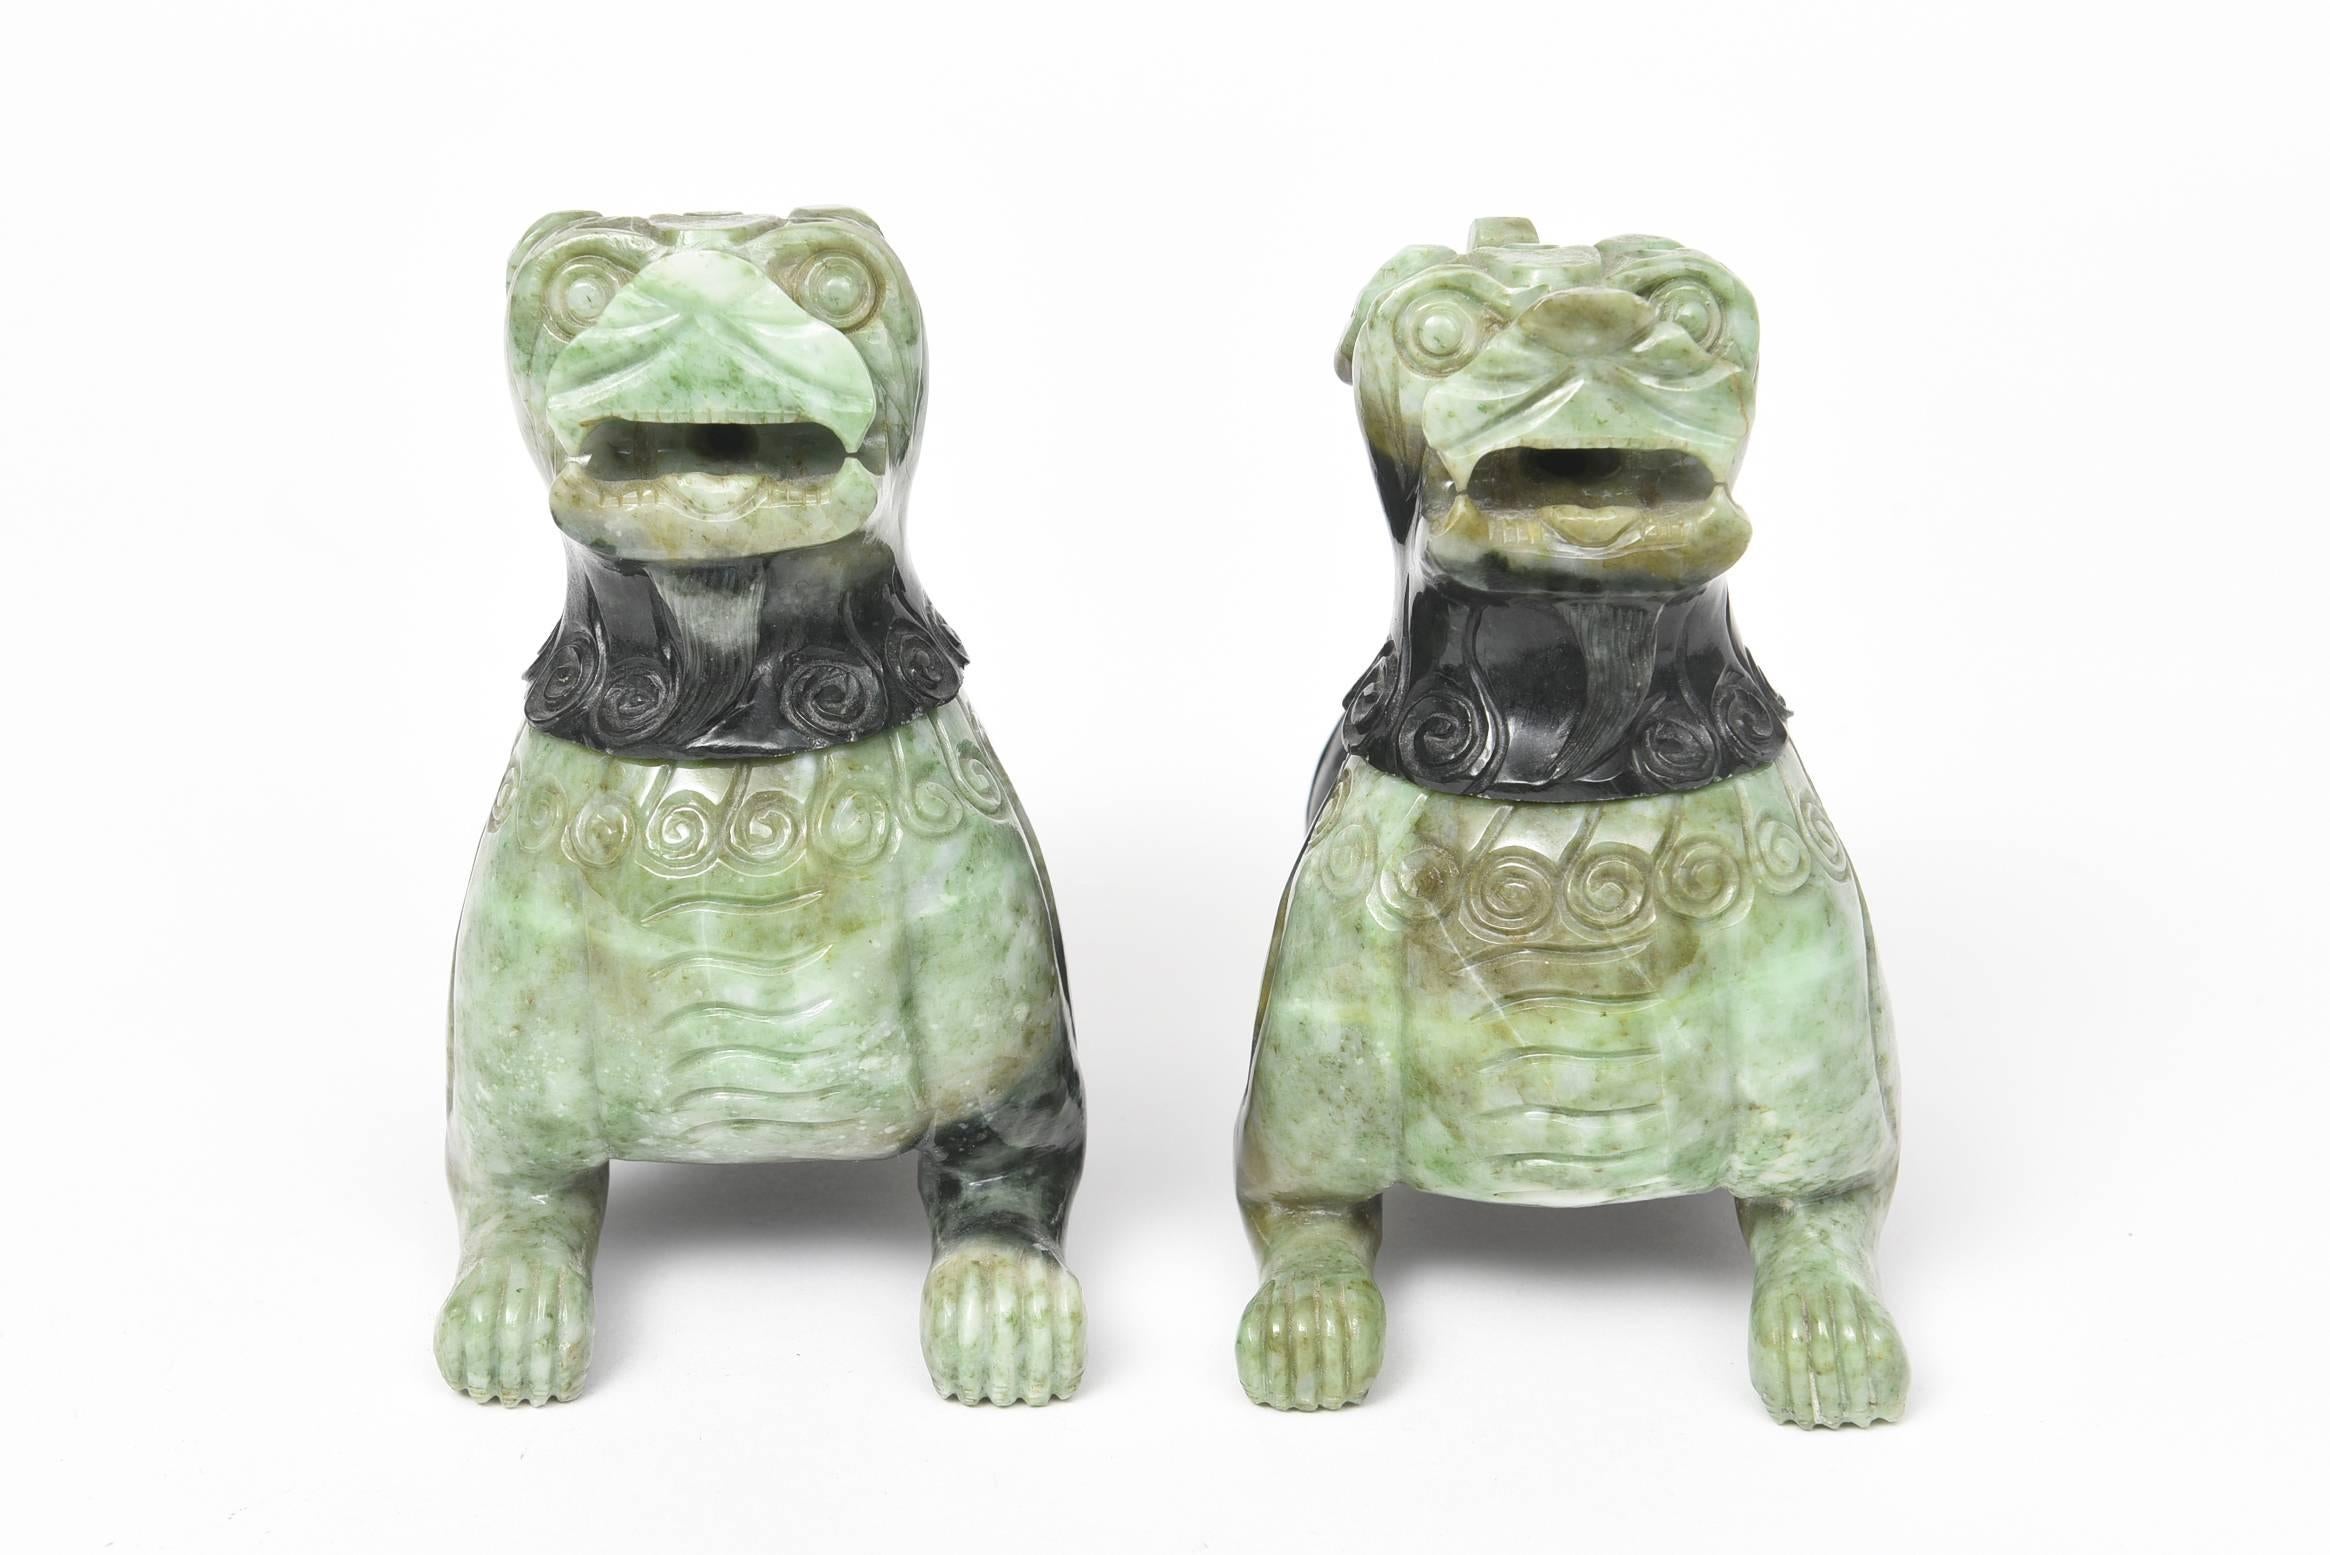 Bi-color green hardstone carved to represent a pair of traditional Chinese foo dogs and lions. The heads of these impressive creatures come off so they can be used as incense burners.